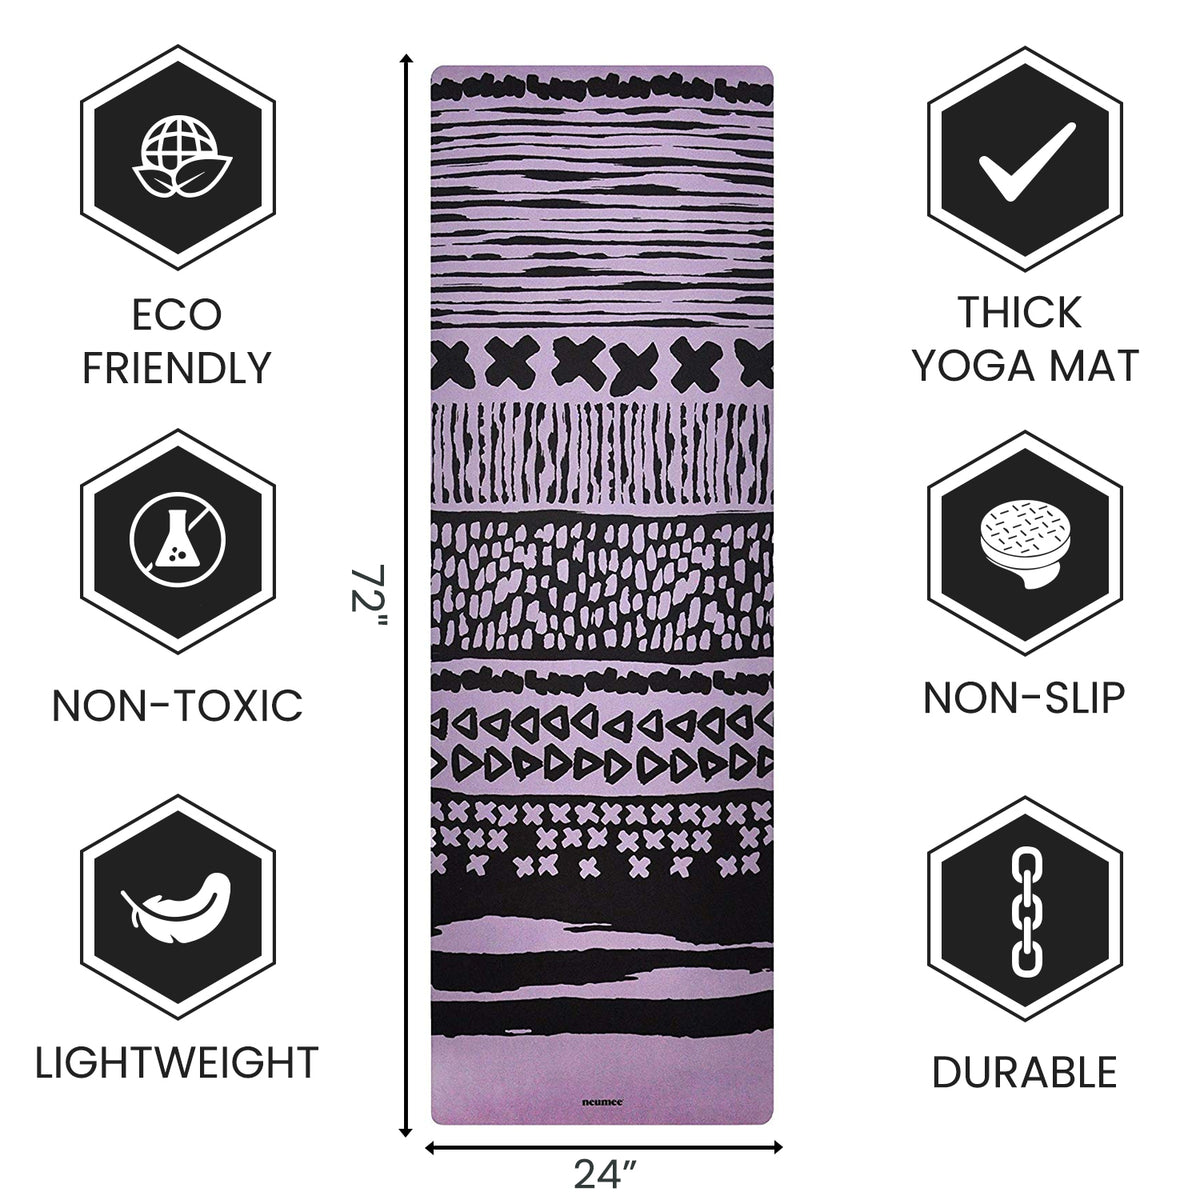  Lomi Fitness Premium Yoga Mat with Eco-Friendly Slip-Free  Material for Exercise & Fitness, Great for Yoga, Pilates and More, Home &  Gym Workouts, Lightweight, 6mm 61cm by 173cm (24in x